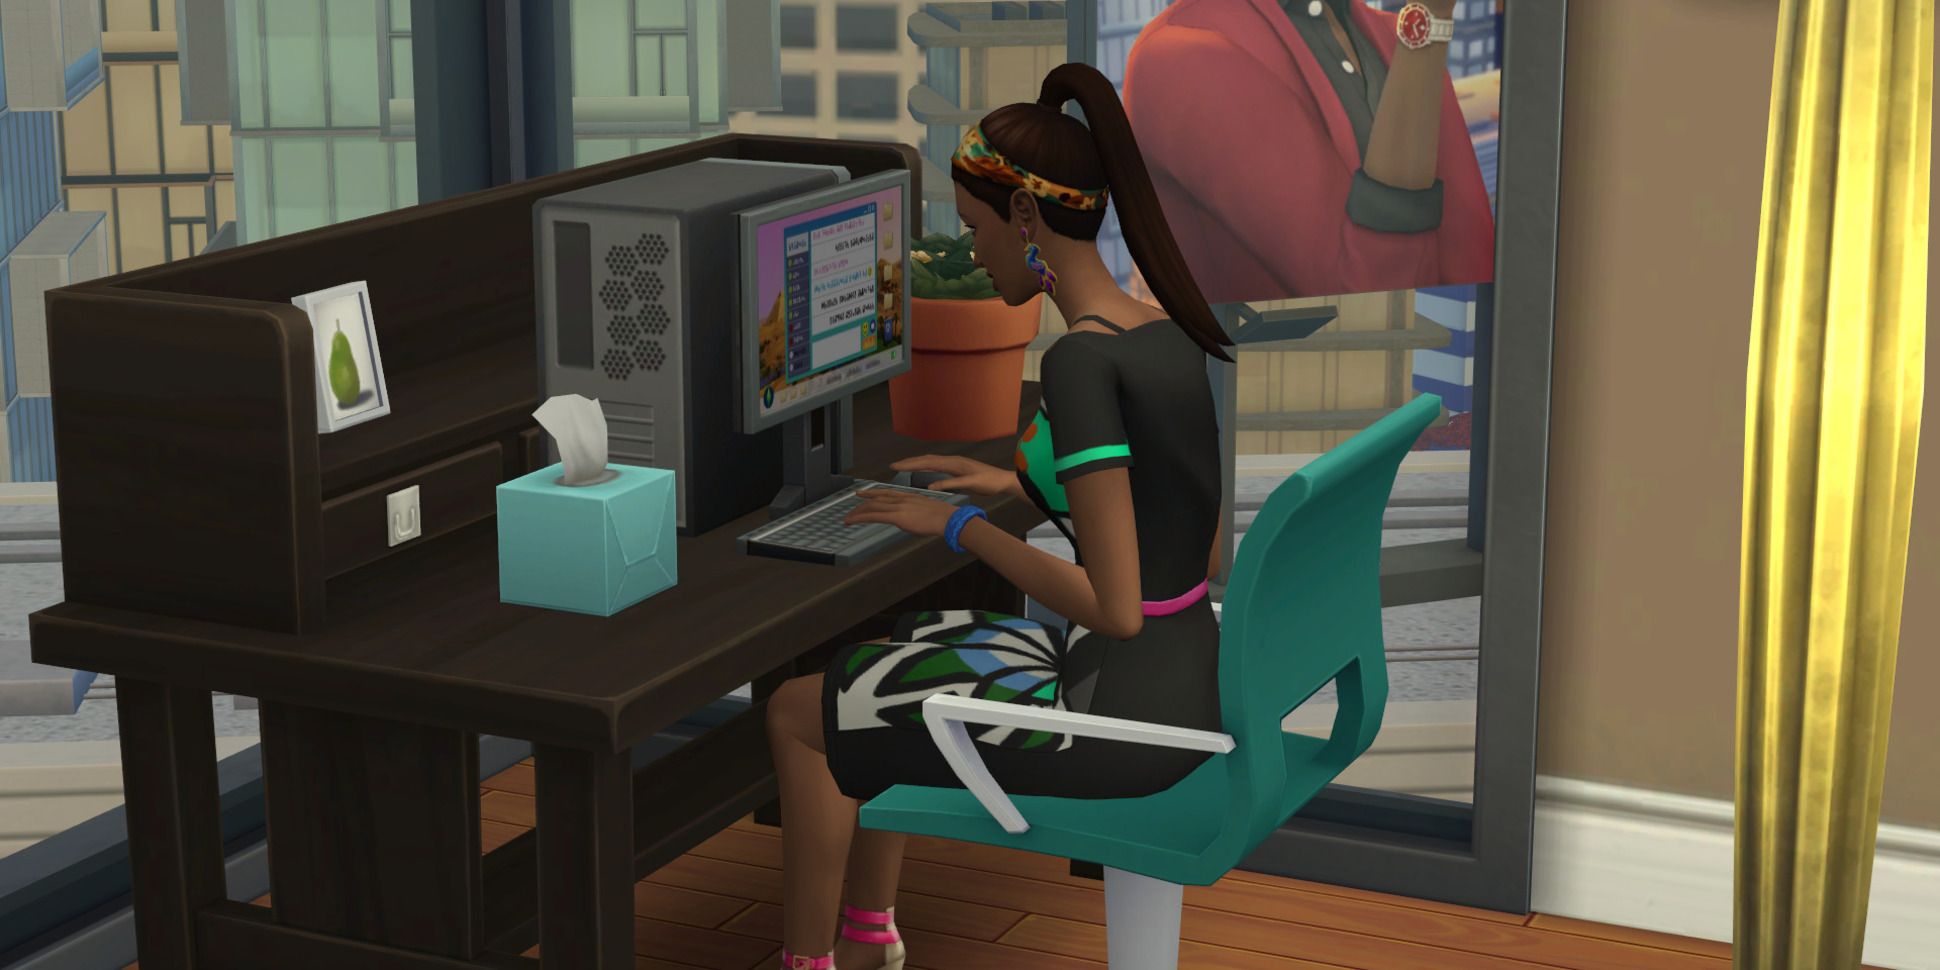 Sims 4's Penny Pizzaz using a computer.